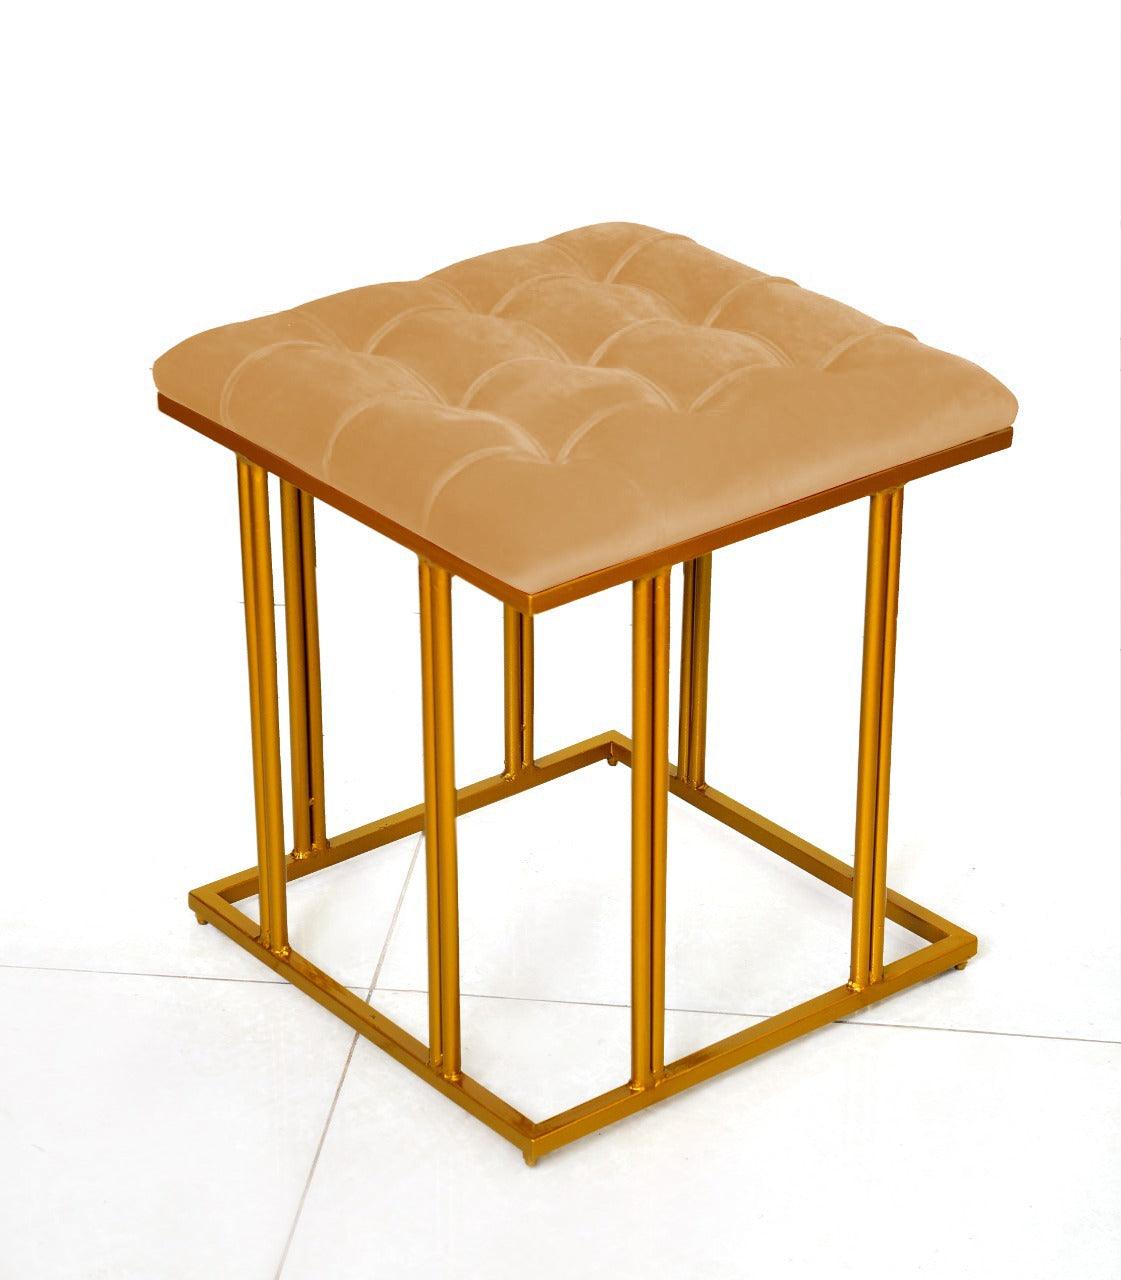 Luxury Velvet Square Stool With Steel Stand -902 - 92Bedding